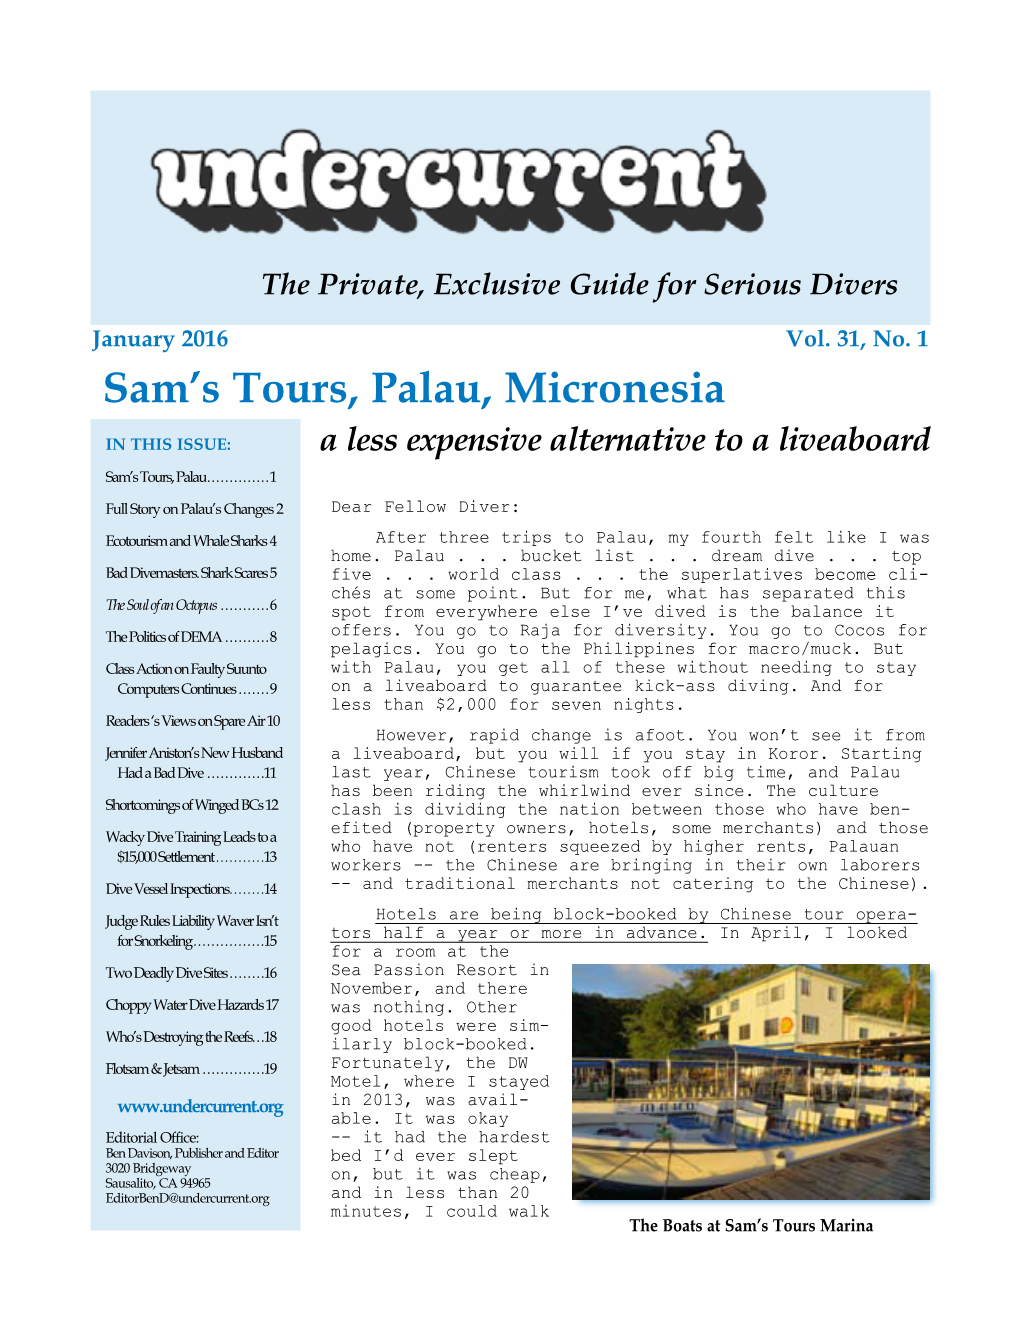 Sam's Tours, Palau, Micronesia + [Other Articles] Undercurrent, January 2016